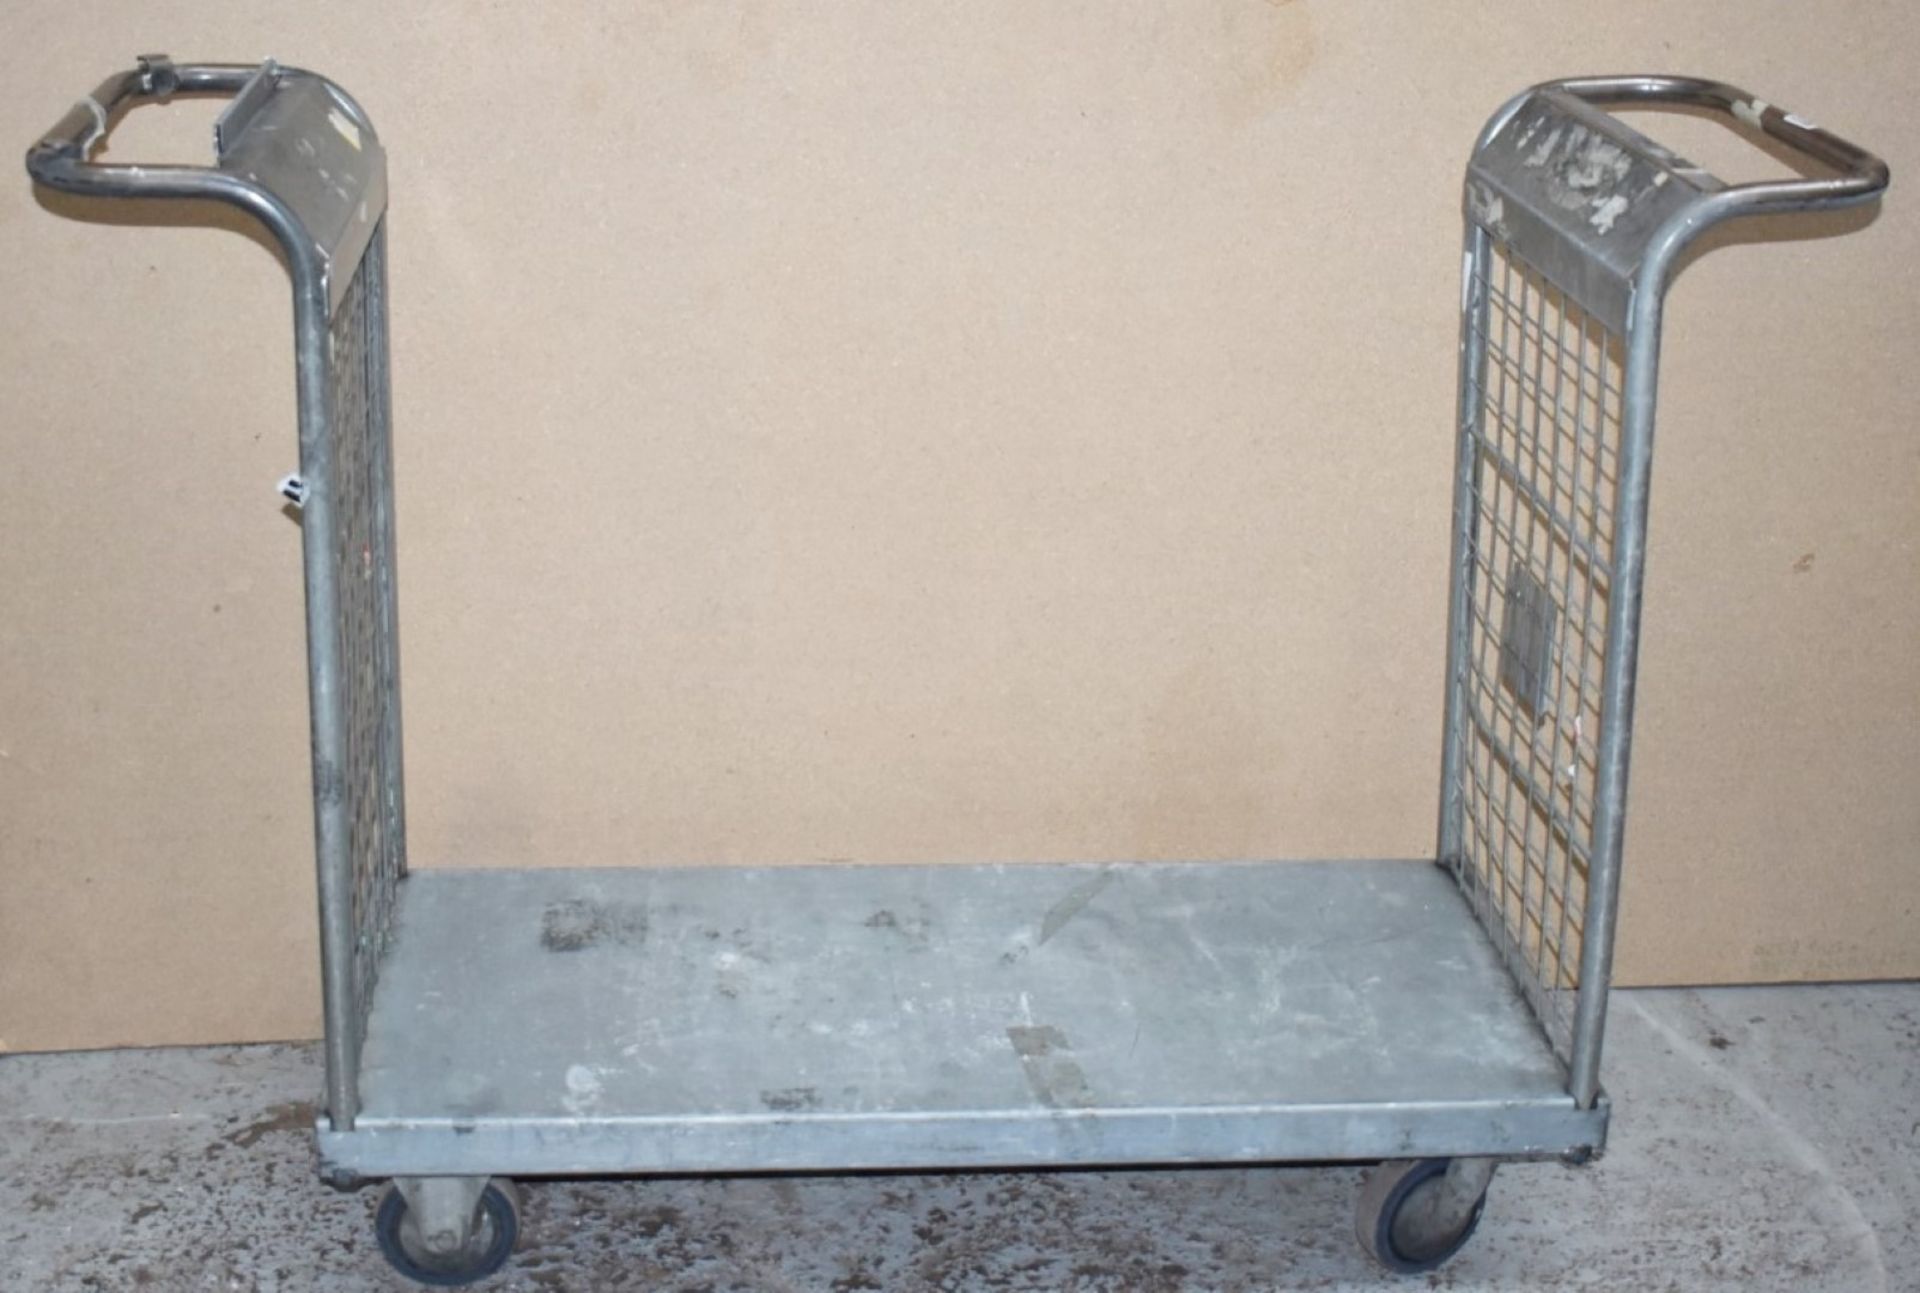 1 x Platform Trolley With Heavy Duty Wheels, Two Handles and Waste Bag Holder - Features a 100 x - Image 2 of 5